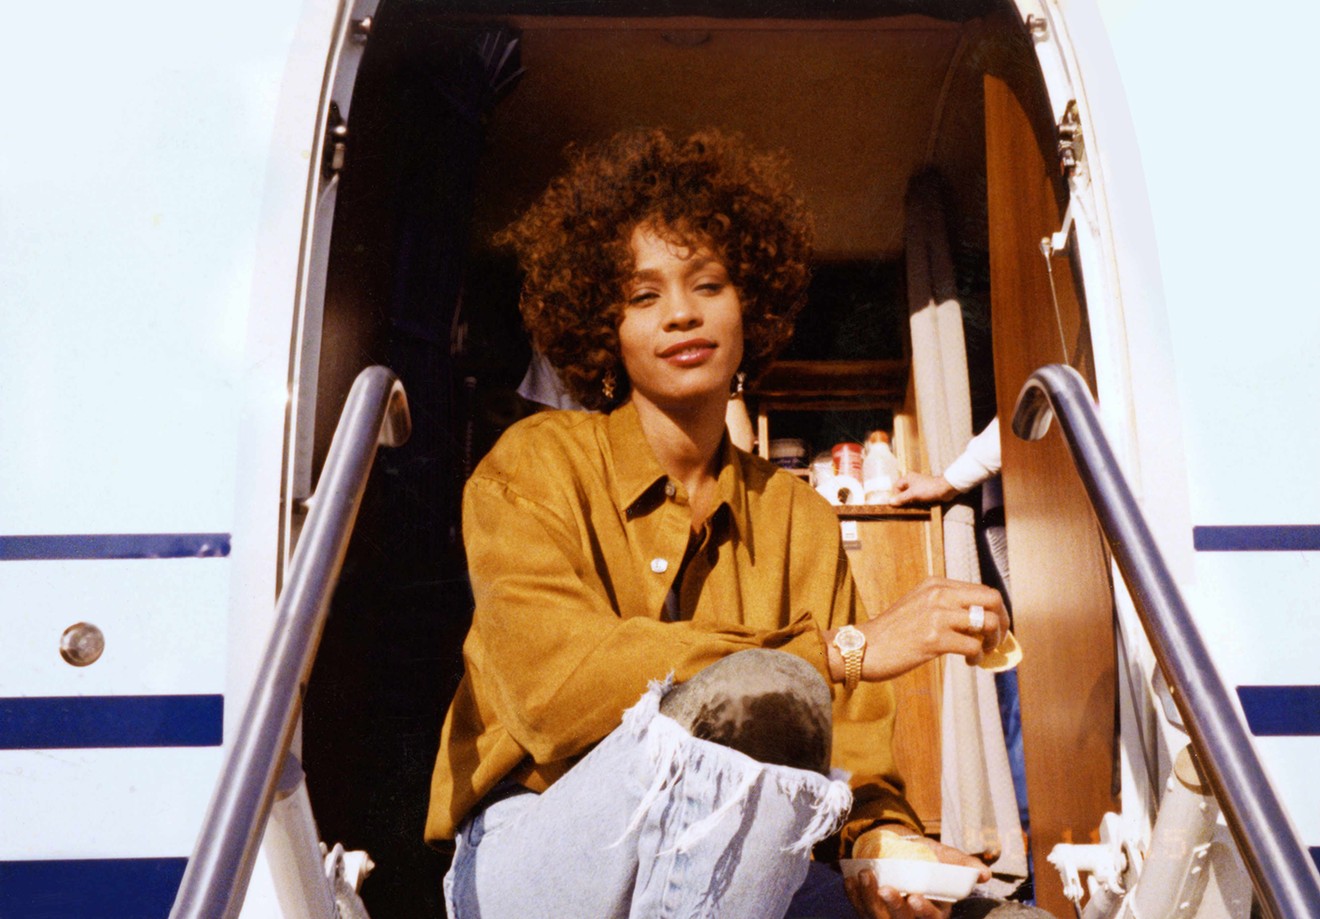 While another documentary of record-breaking pop artist Whitney Houston might seem maddeningly familiar, Scottish filmmaker Kevin Macdonald does present some spine-tingling footage in Whitney.